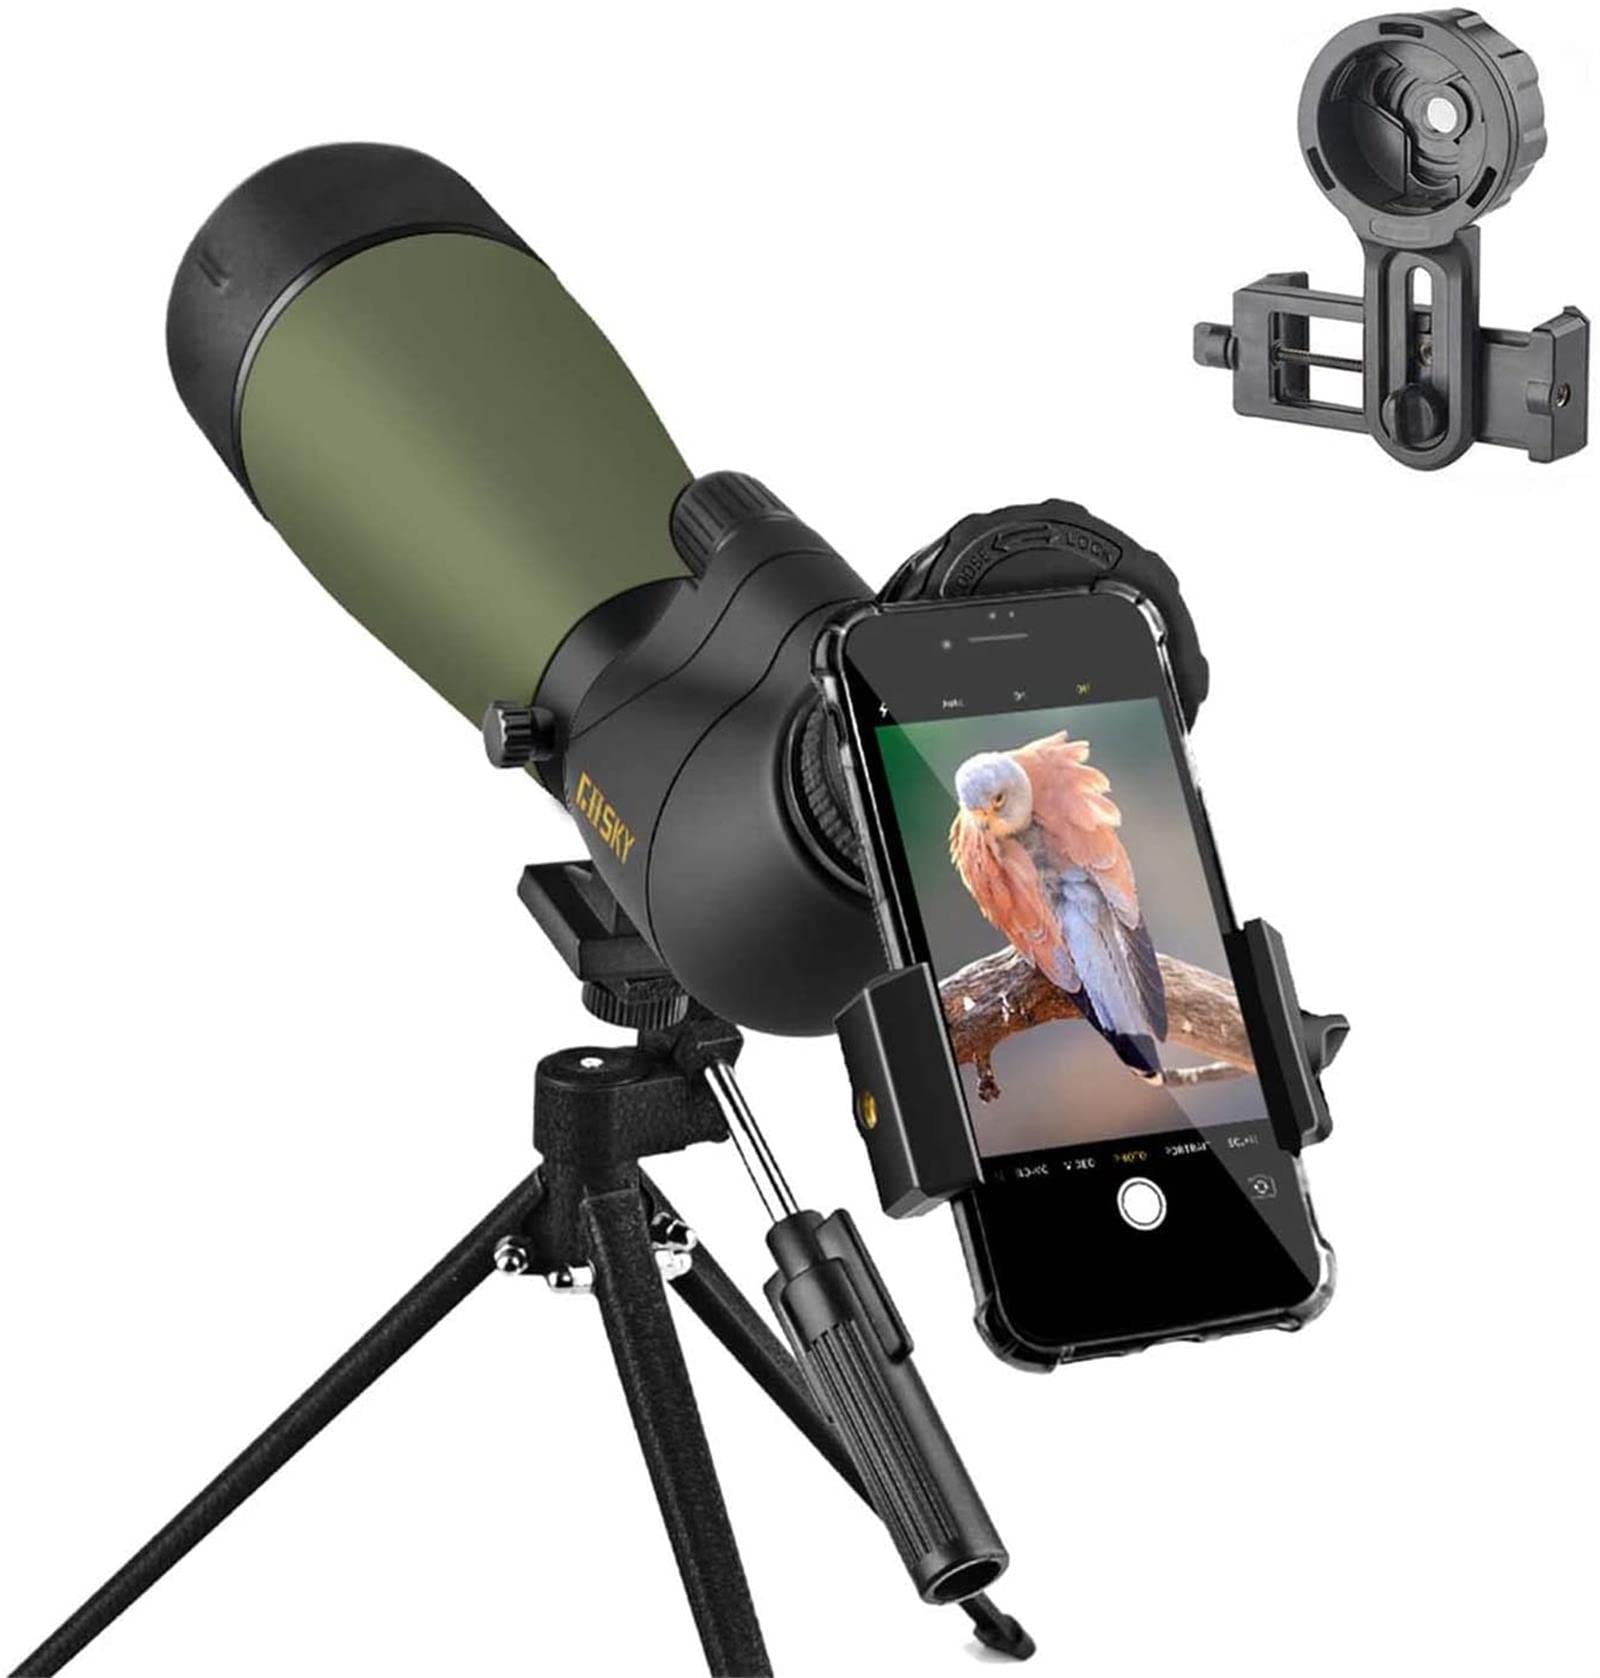 GOSKY Updated 20-60x80 Spotting Scope with Tripod, Carrying Bag - BAK4 Angled Scope for Target Shooting Hunting Bird Watching Wildlife Scenery (with Smartphone Adapter+SLR Mount compatible with Nikon)